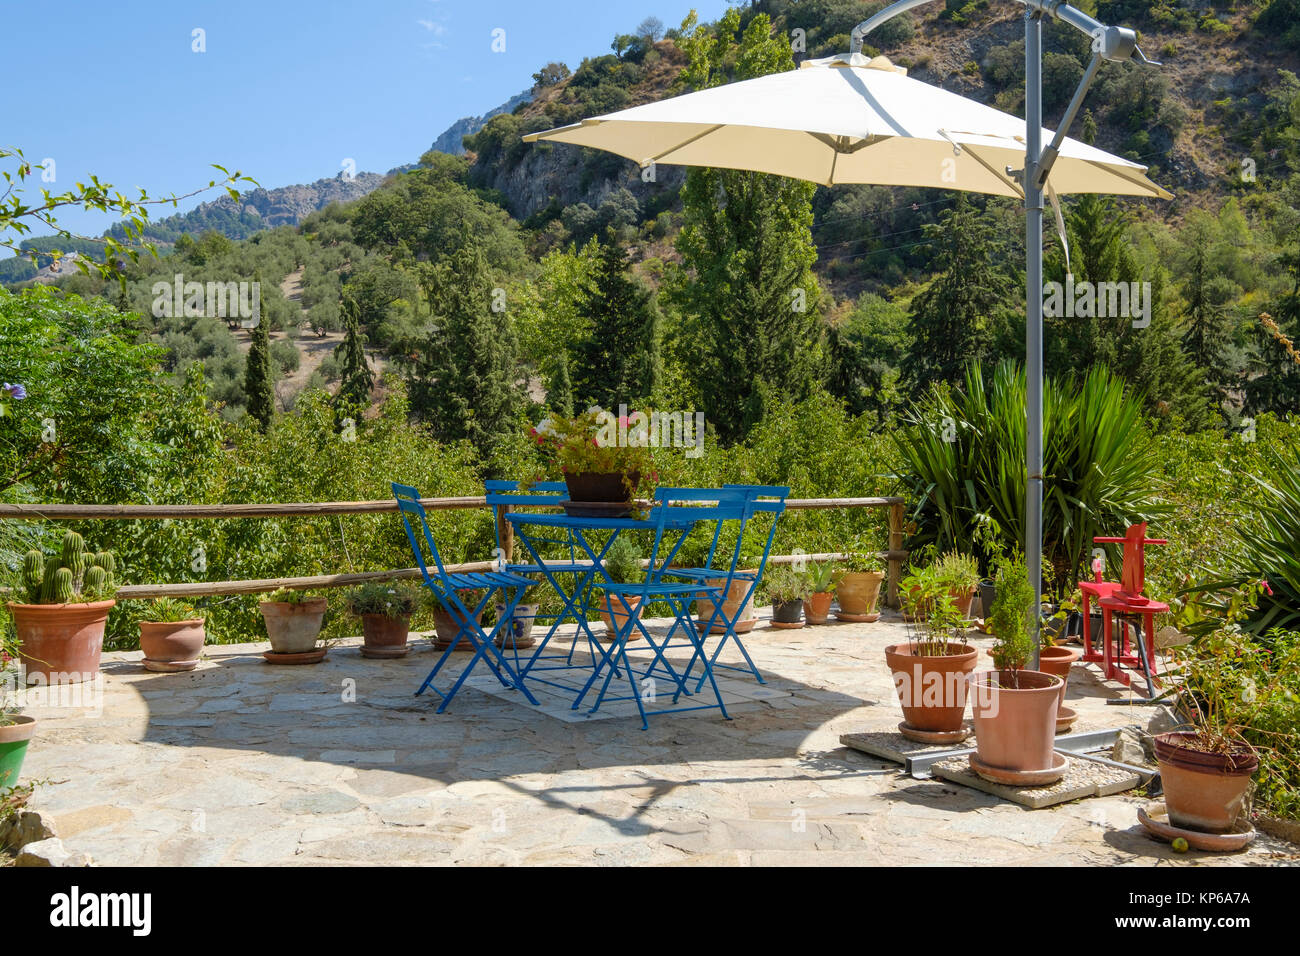 large parasol above a garden set in a beautiful setting with lots of decoration Stock Photo